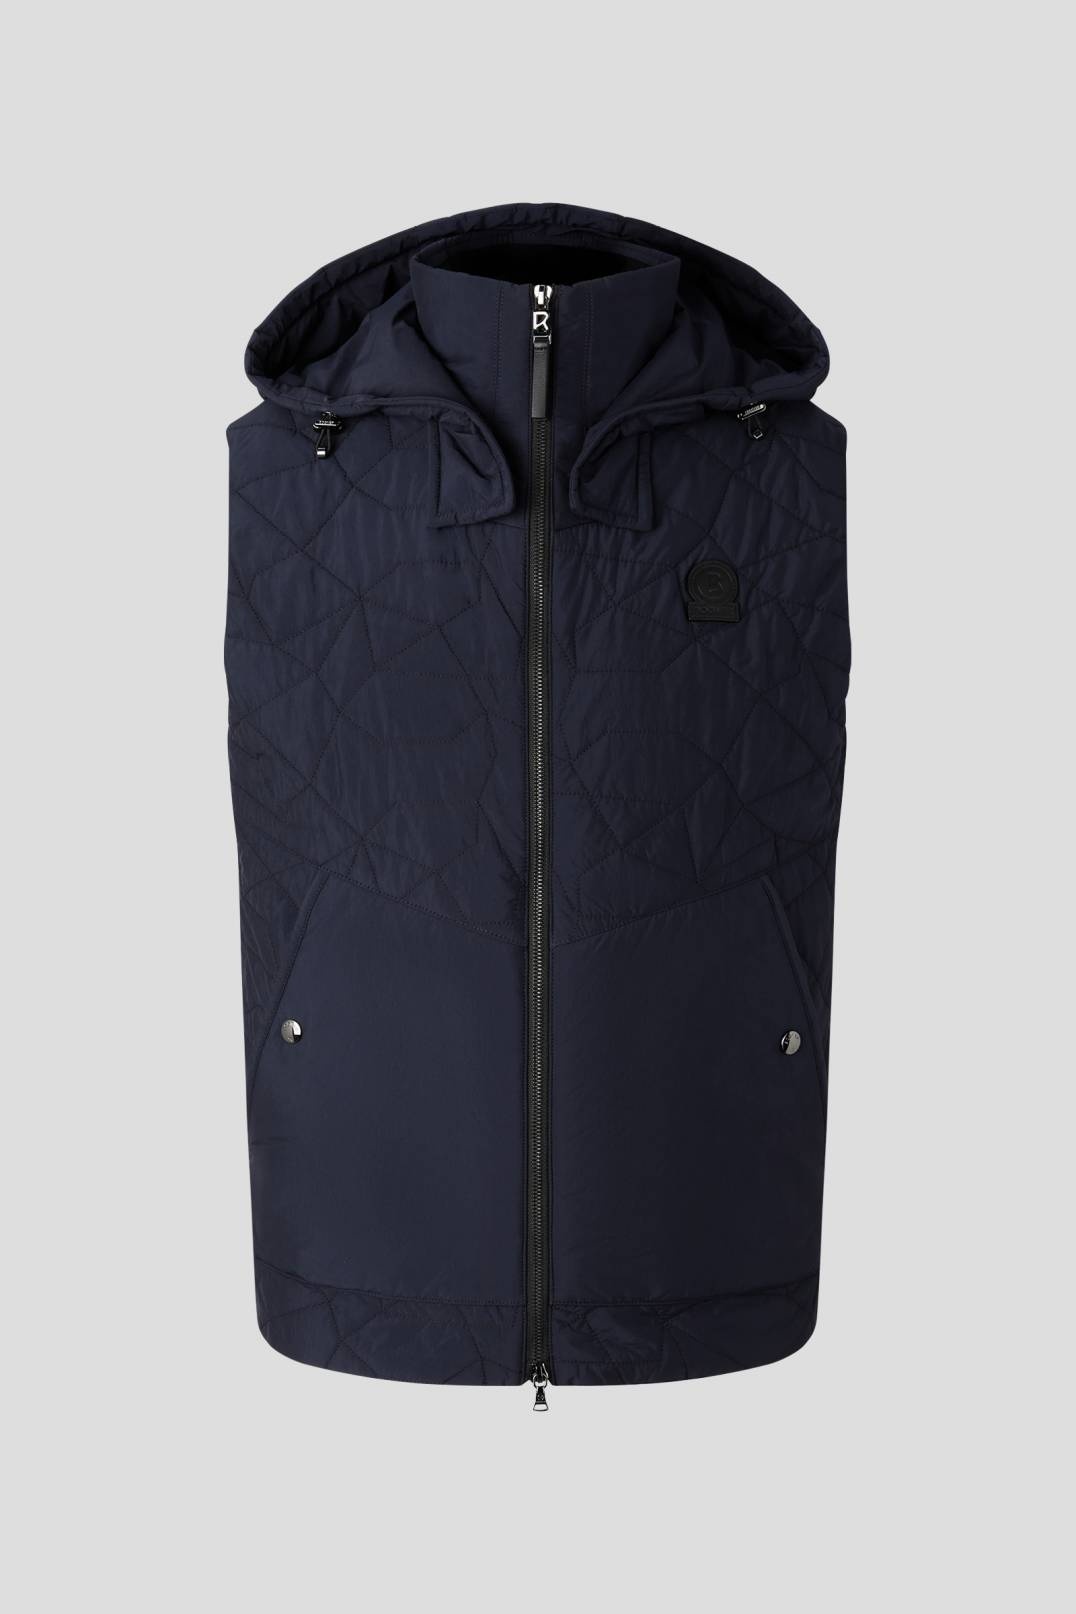 SIMON QUILTED WAISTCOAT IN NAVY BLUE - 1